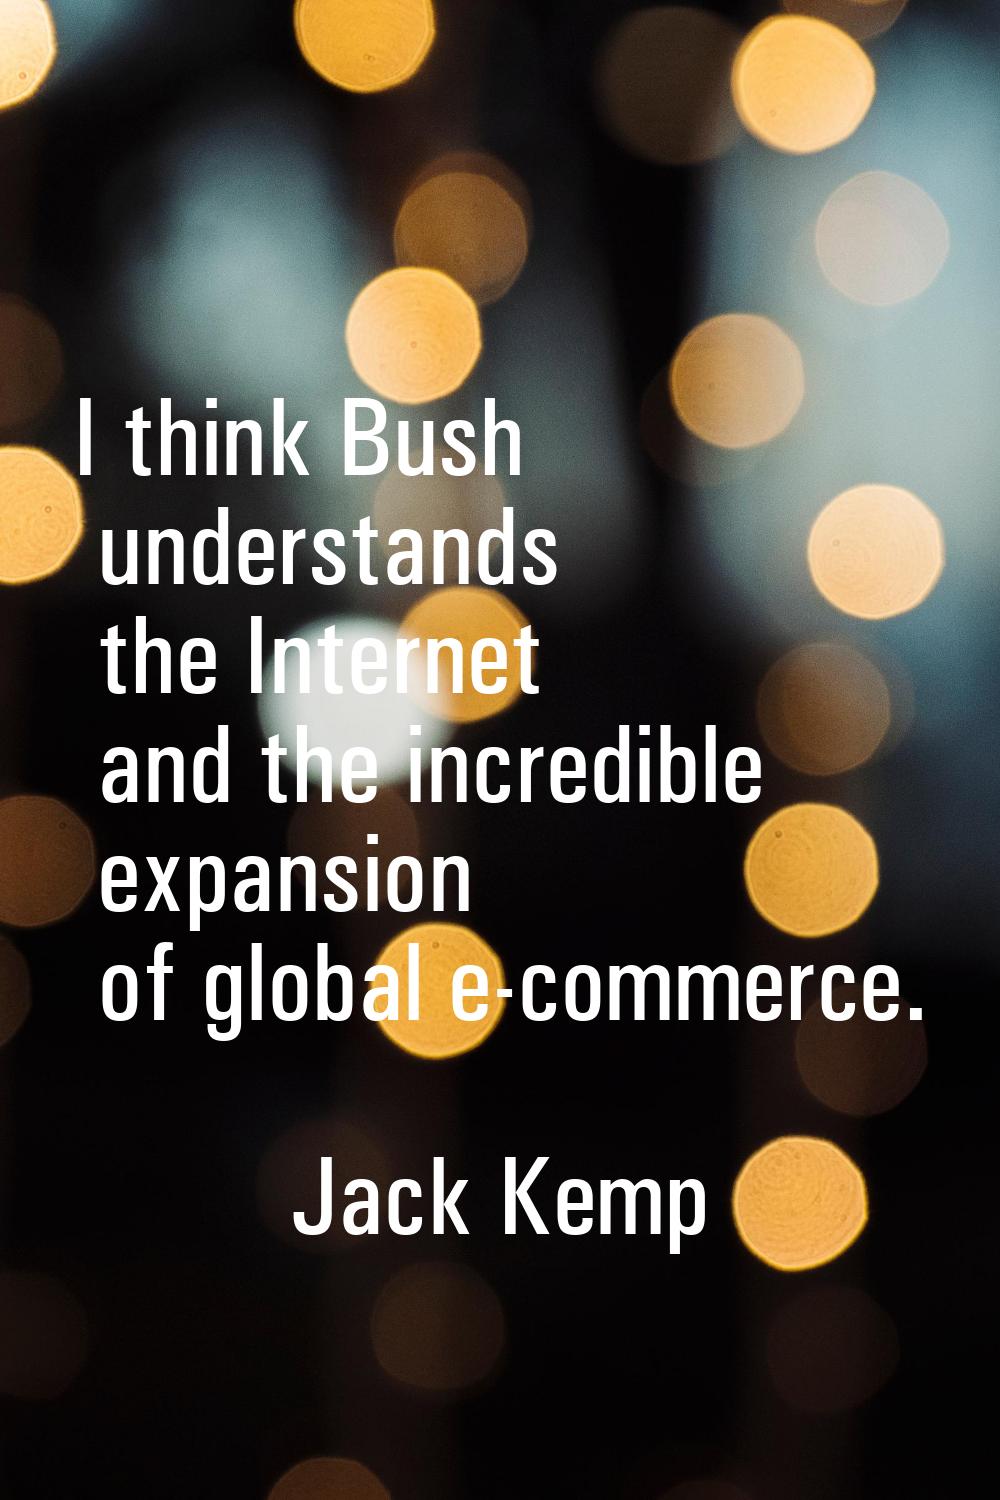 I think Bush understands the Internet and the incredible expansion of global e-commerce.